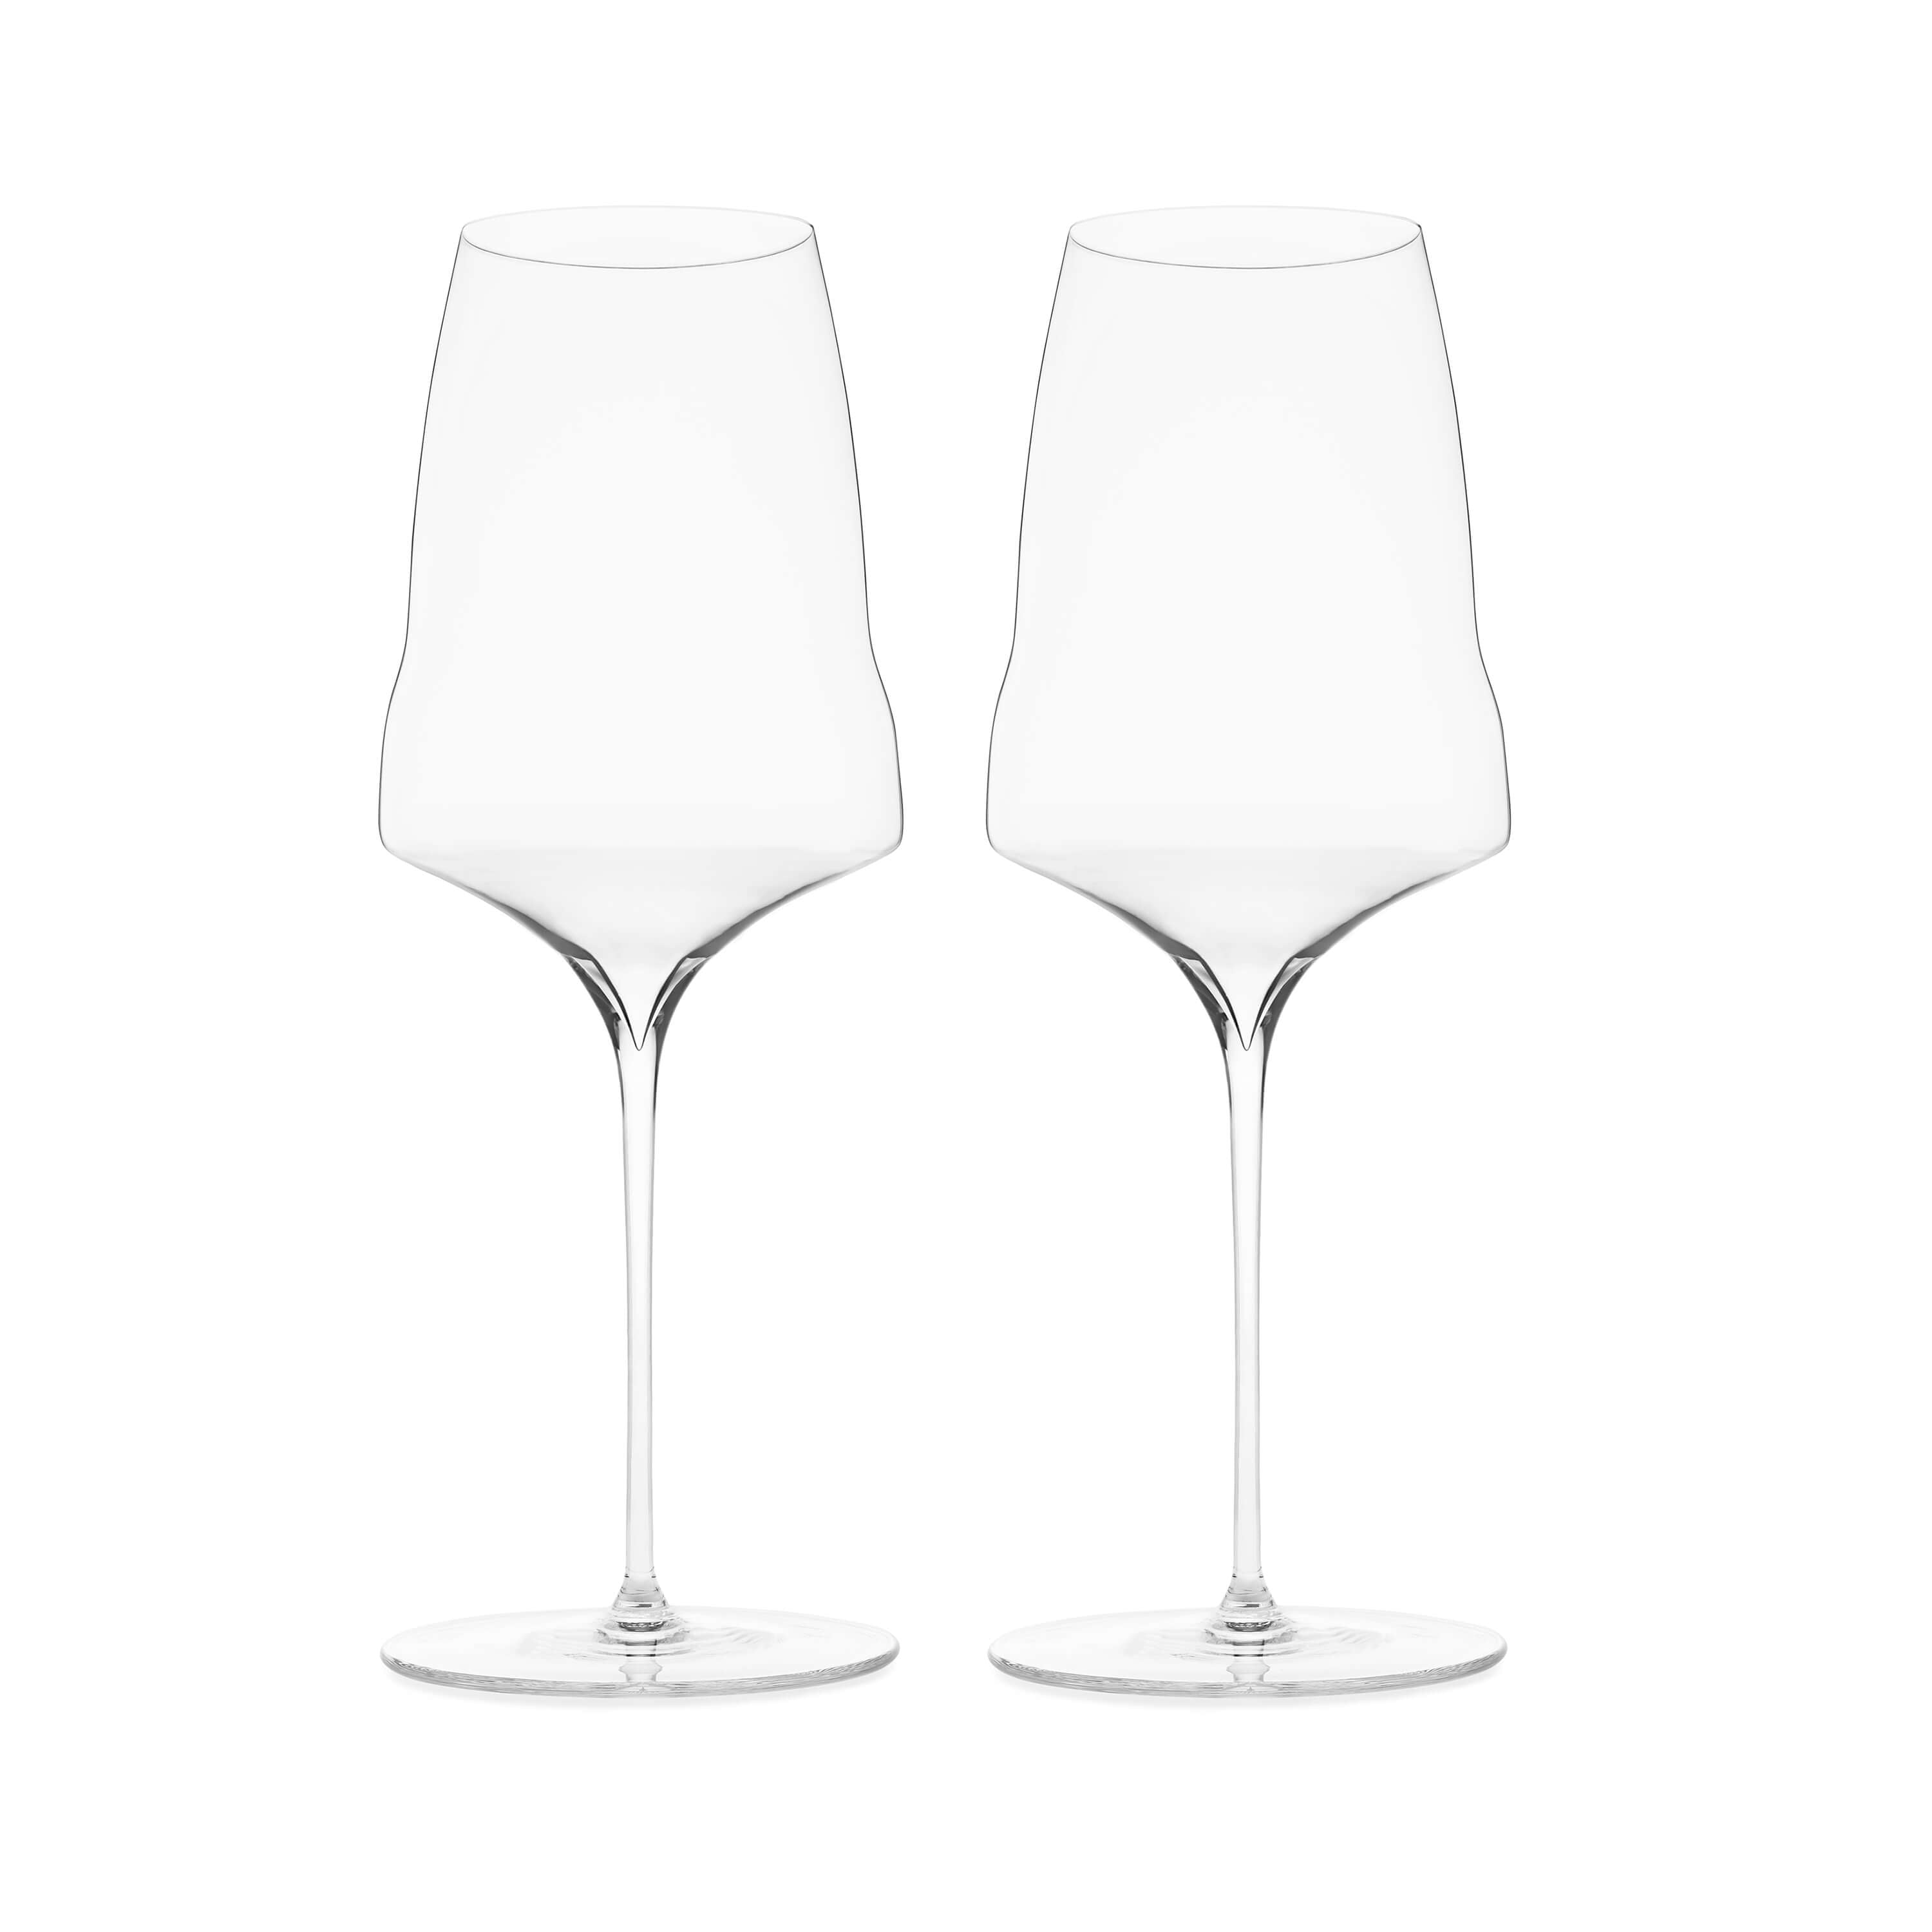 Set of two universal glasses No. 2 by Josephine